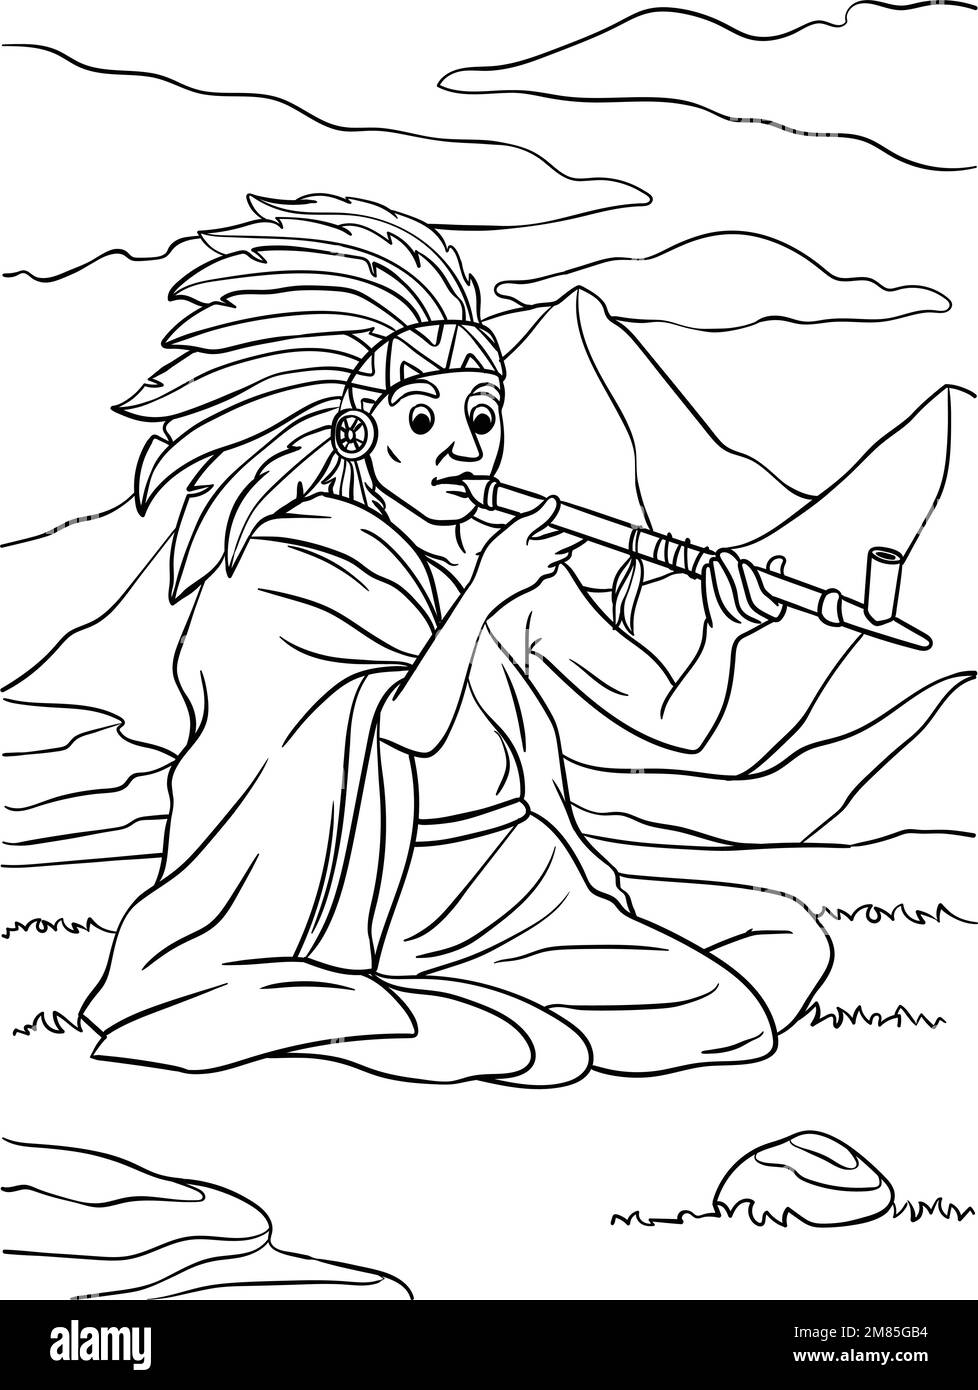 Native American Indian with Calumet Coloring Page Stock Vector